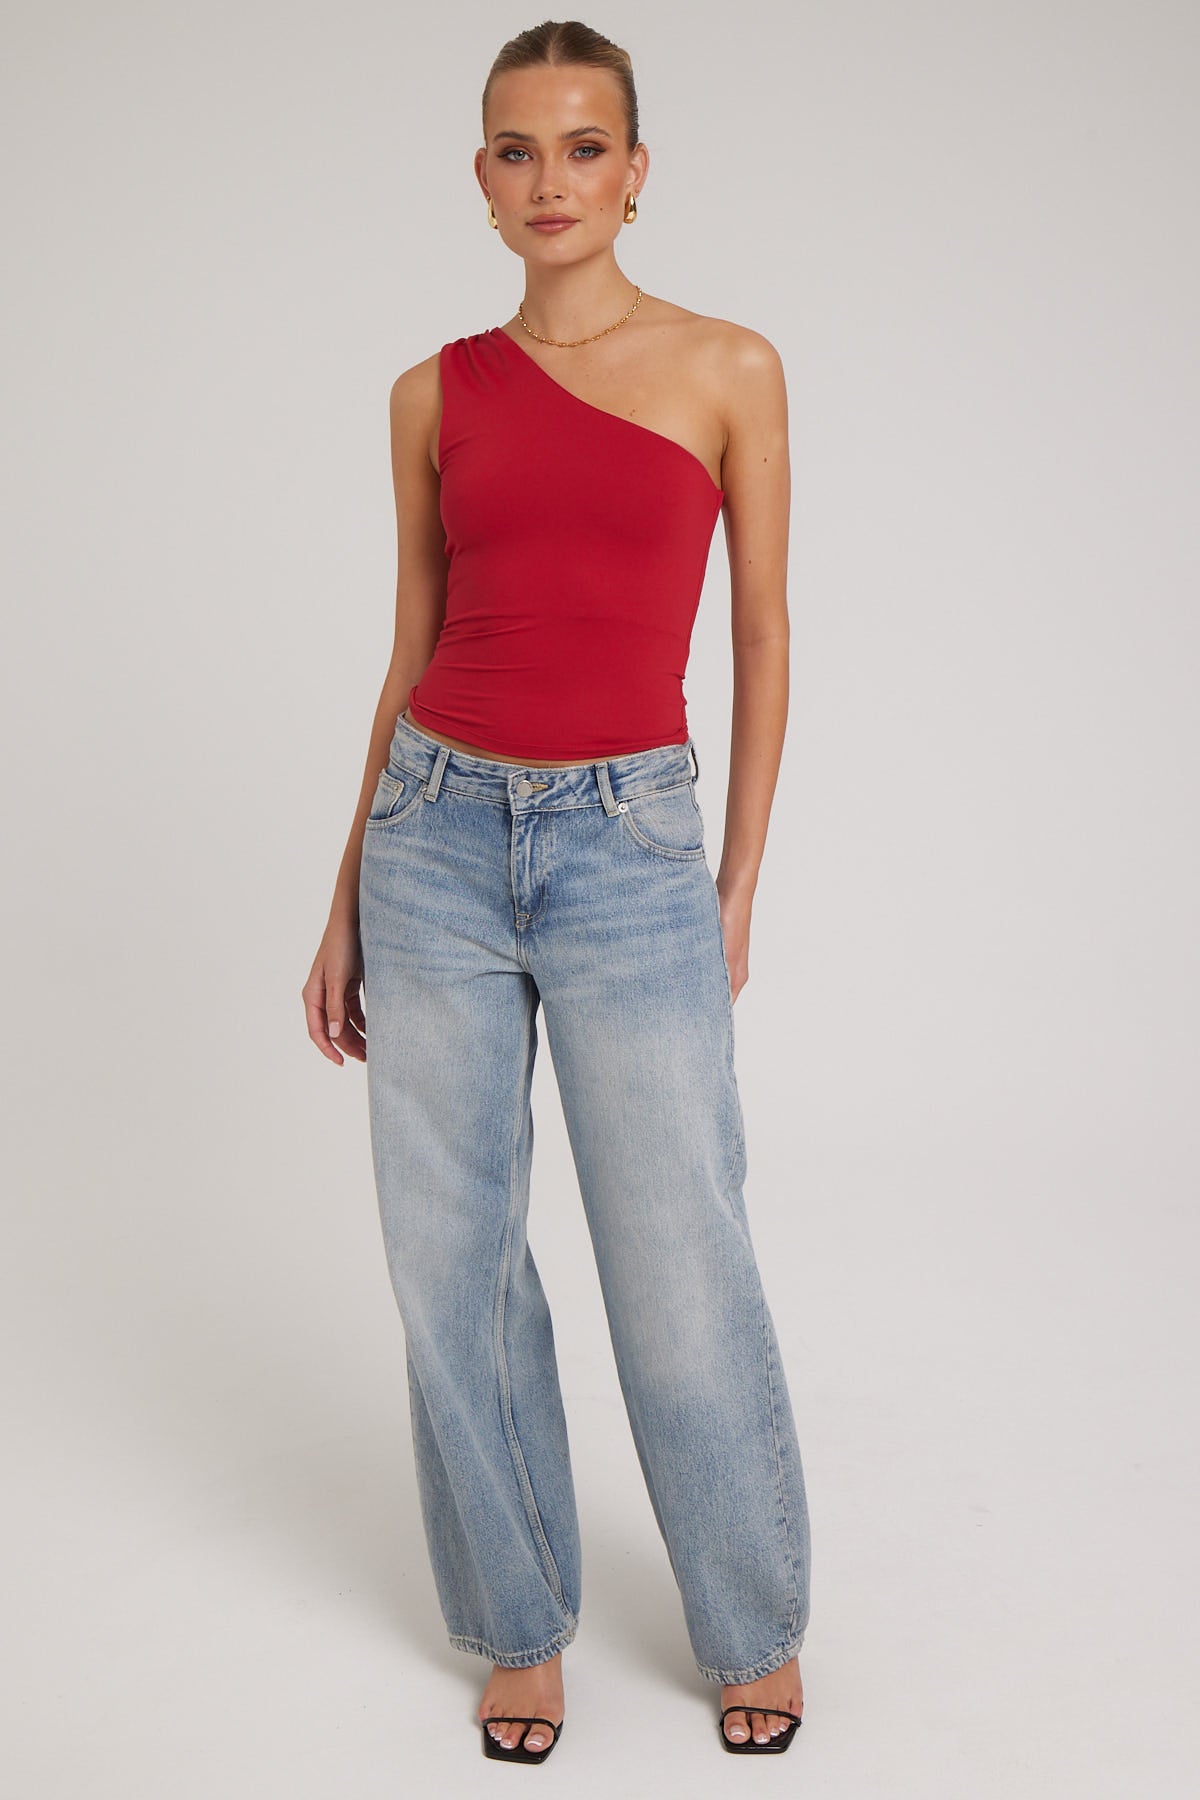 L&t Ruched One Shoulder Top Red – Universal Store